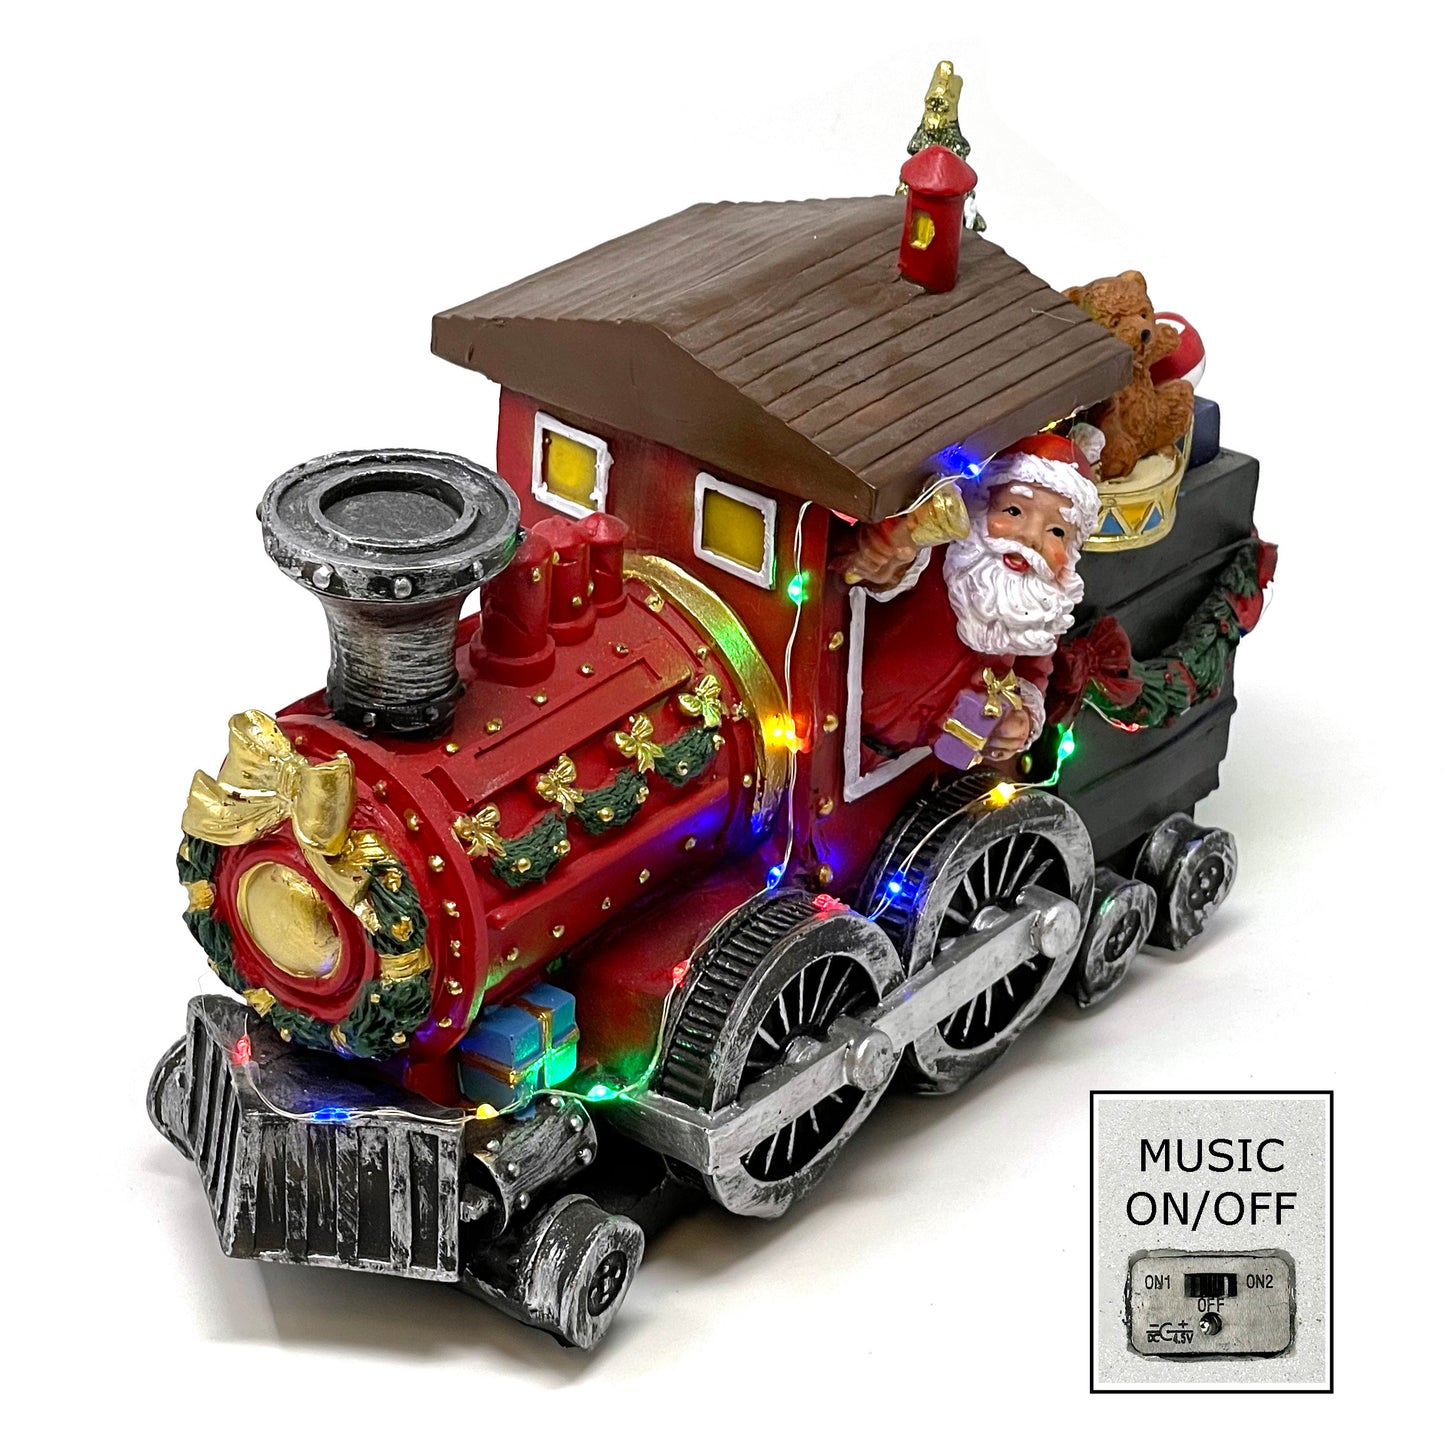 Crafted Polyresin Christmas House Collectable Figurine with USB and Battery Dual Power Source-Santa's Express Train-XH93429